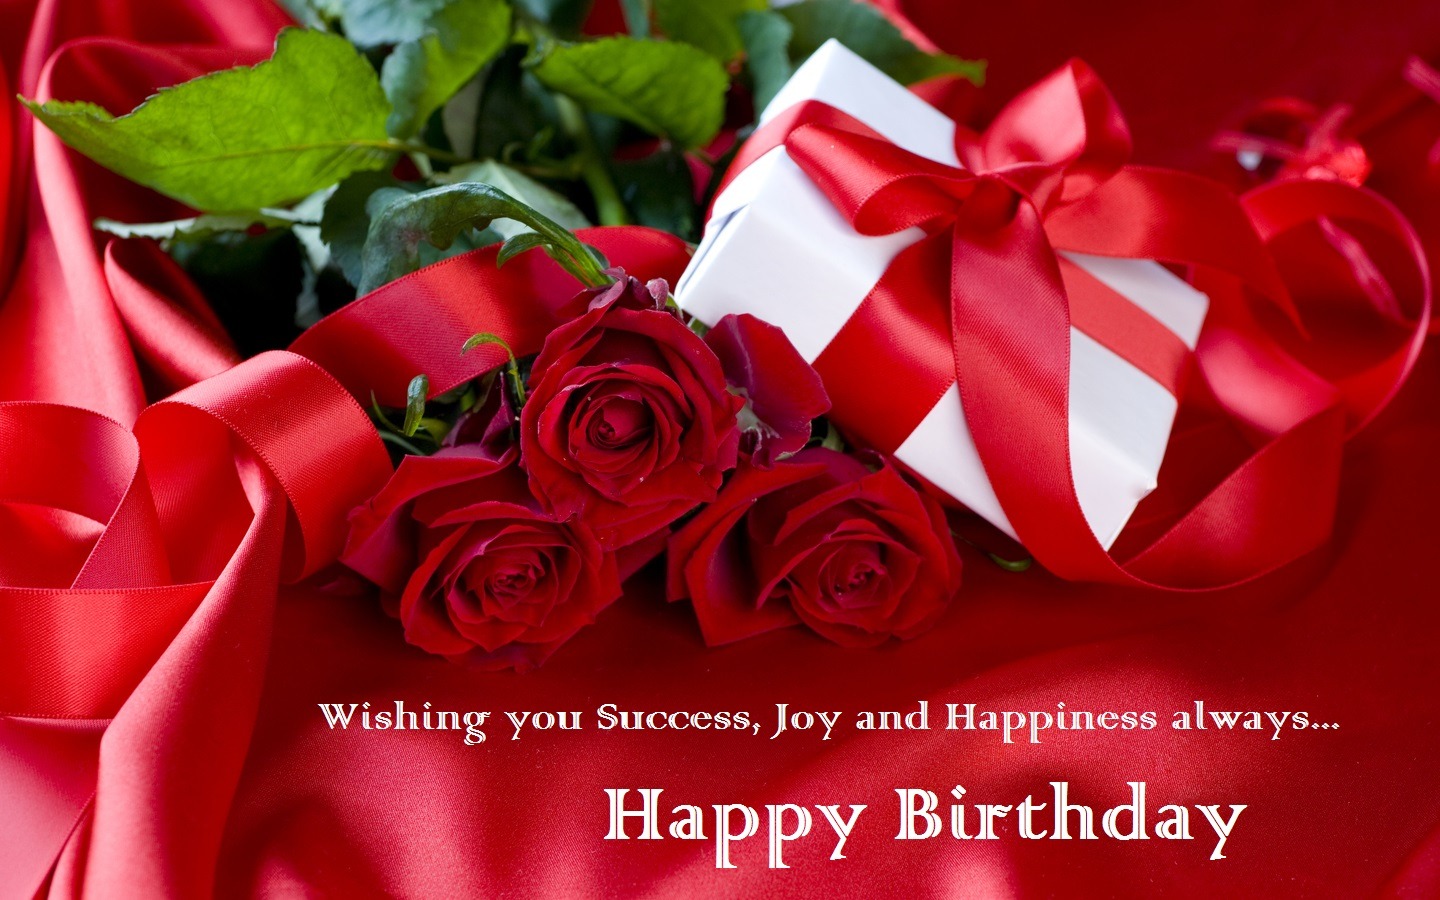 Happy Birthday Funny Wishes, Messages, SMS